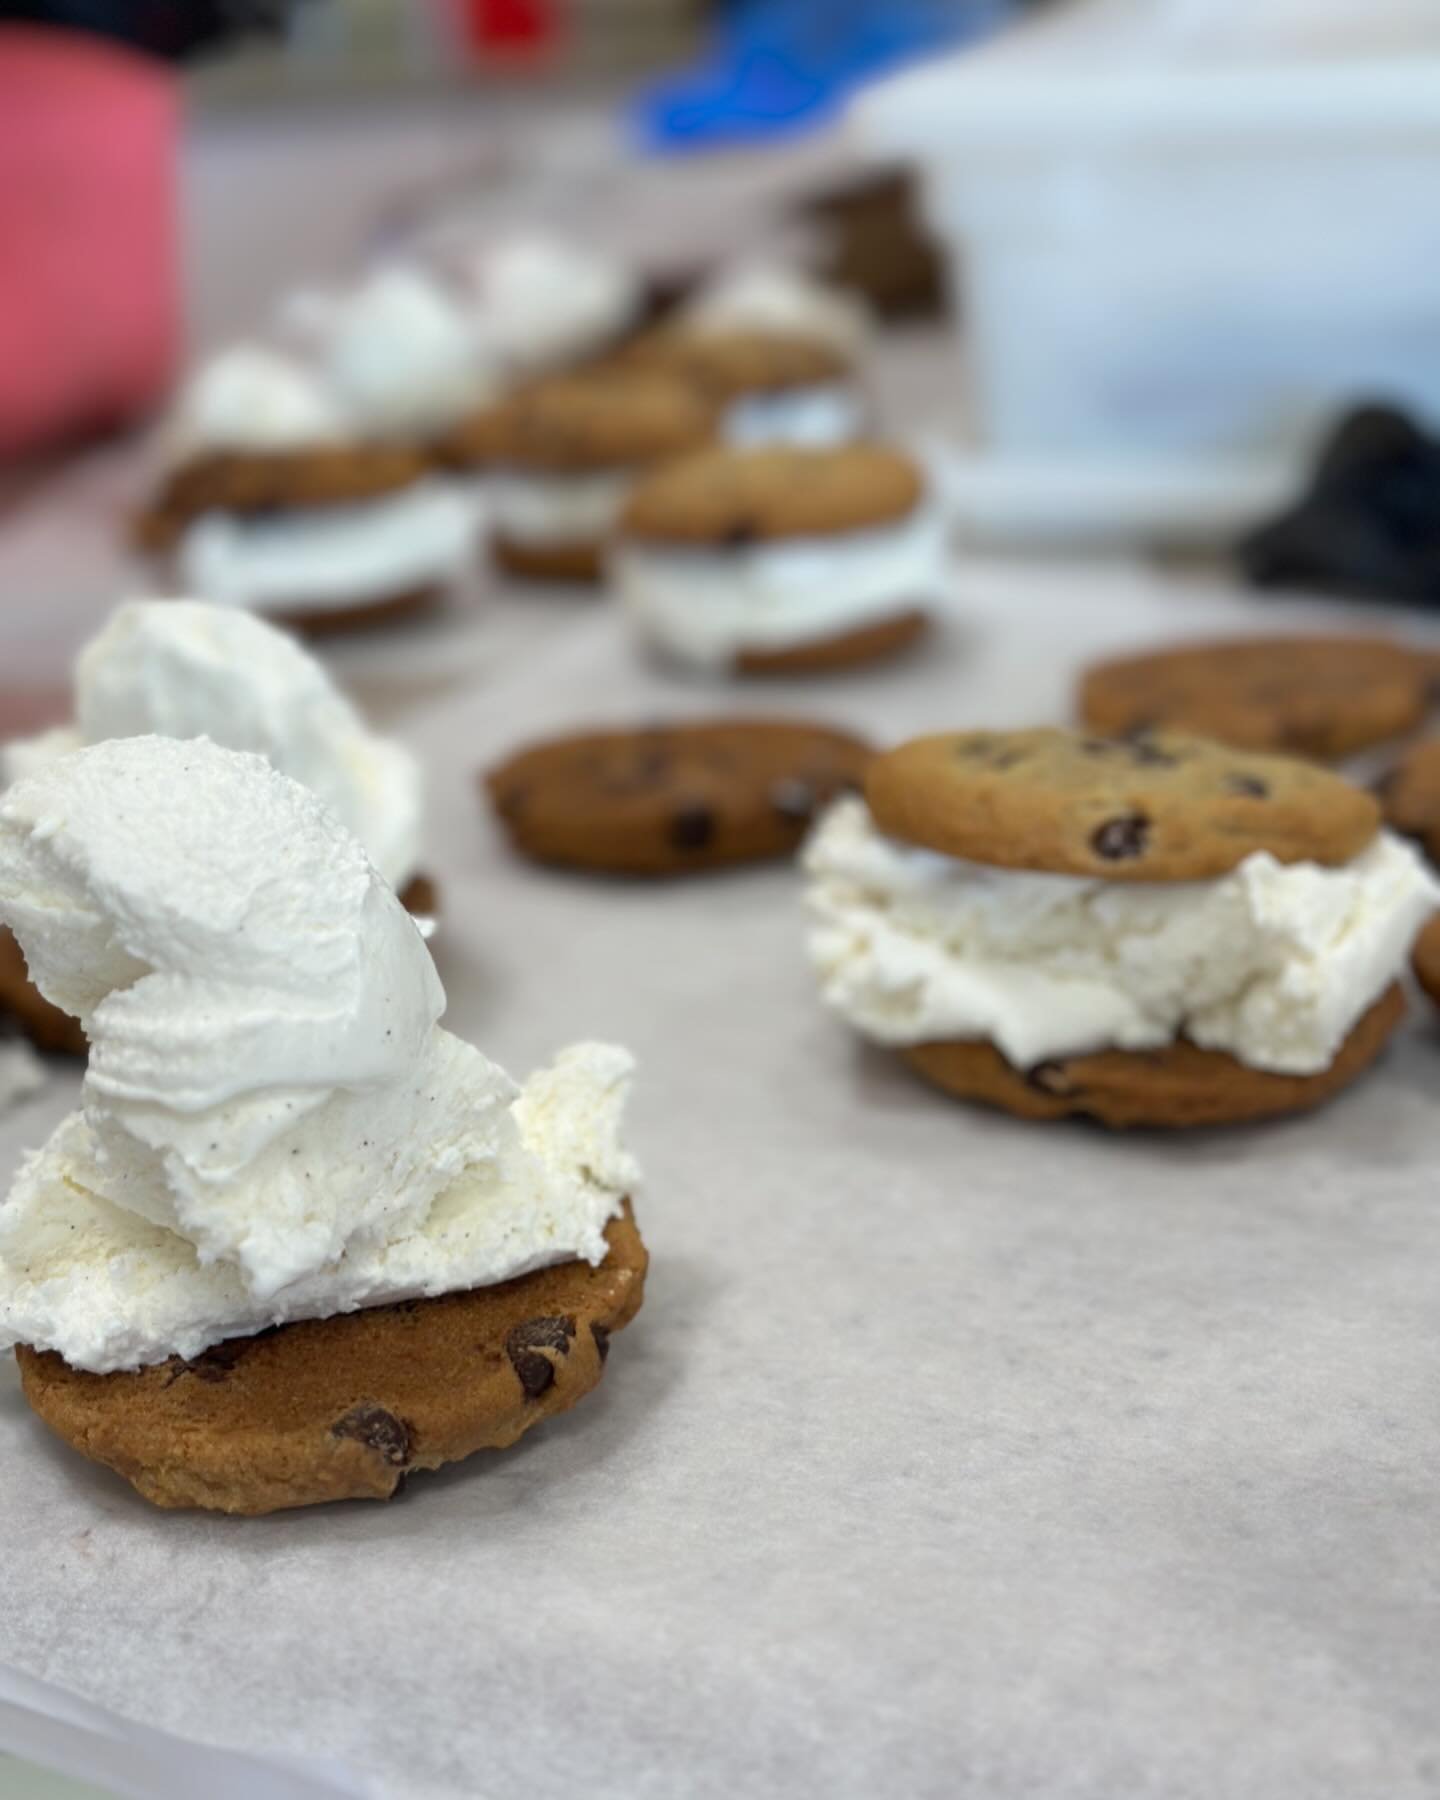 Not sure which photo I love the most so I had to post em all. Bath has a brand new 🍦 ICE CREAM 🍦 freezer and we made these ice cream sandwiches this morning. Started out with a classic - chocolate chip cookies with vanilla bean ice cream 🤤 we will